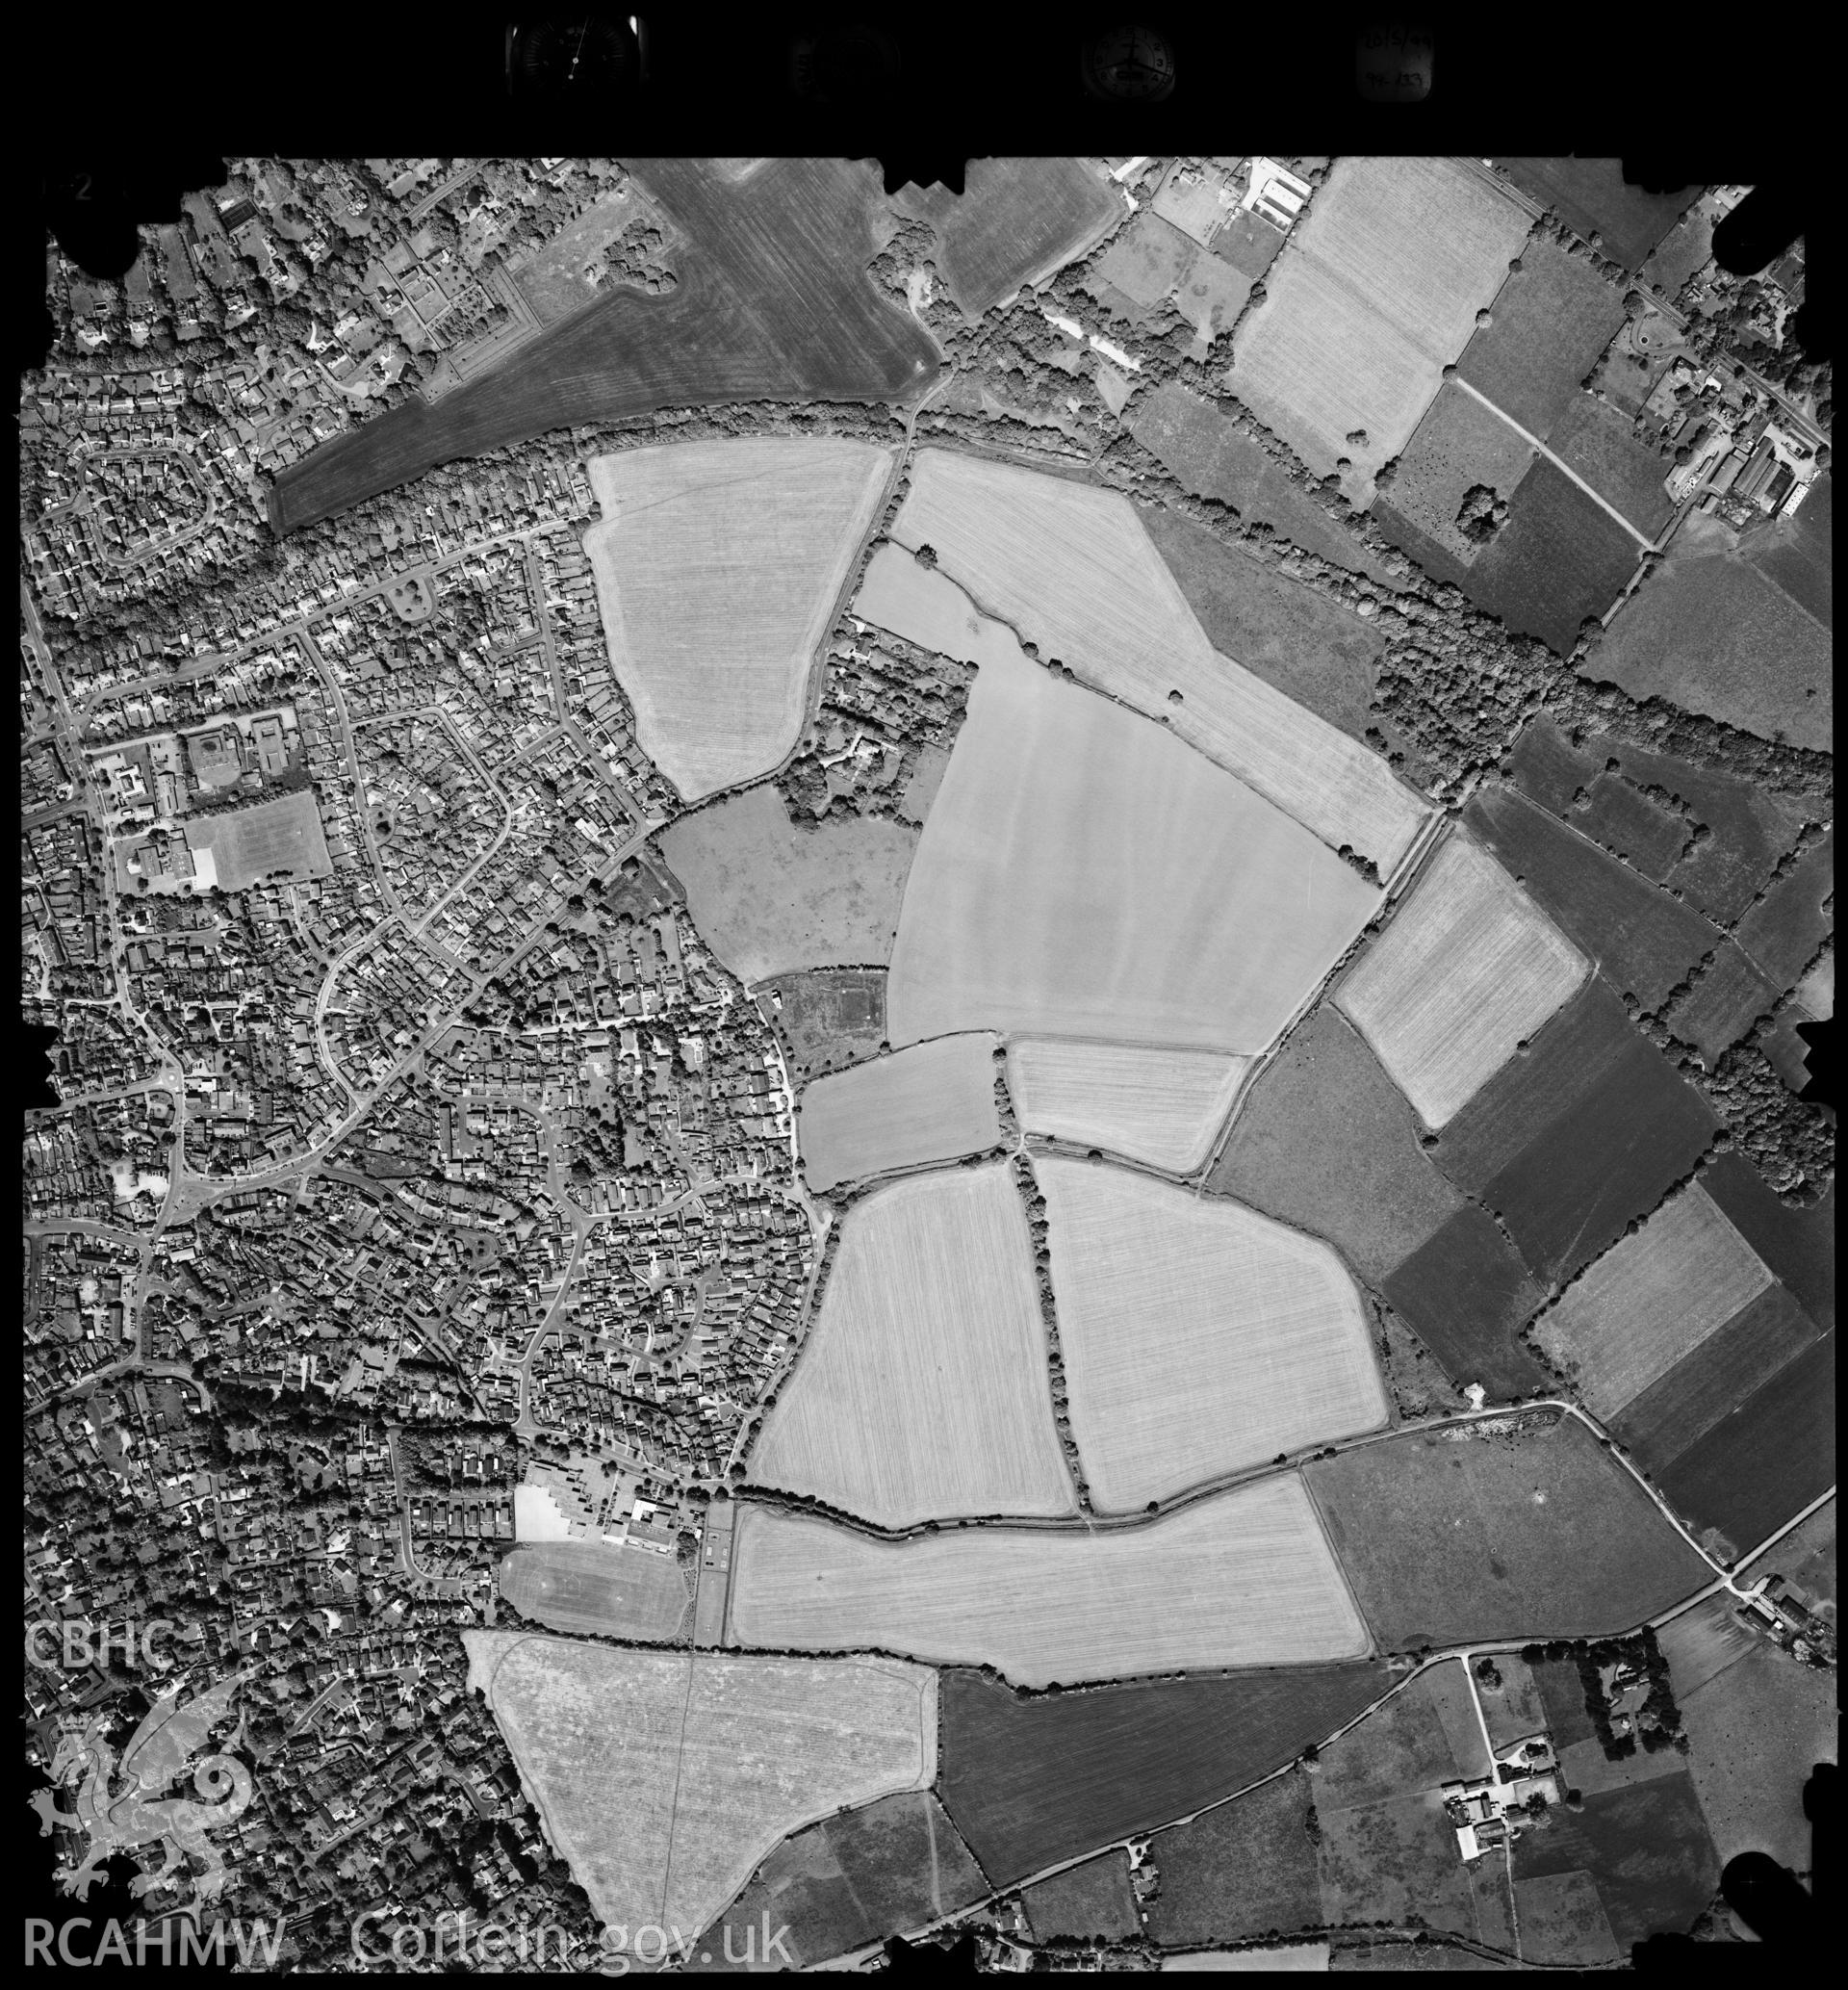 Digitized copy of an aerial photograph showing the Wirral area,  taken by Ordnance Survey, 1999